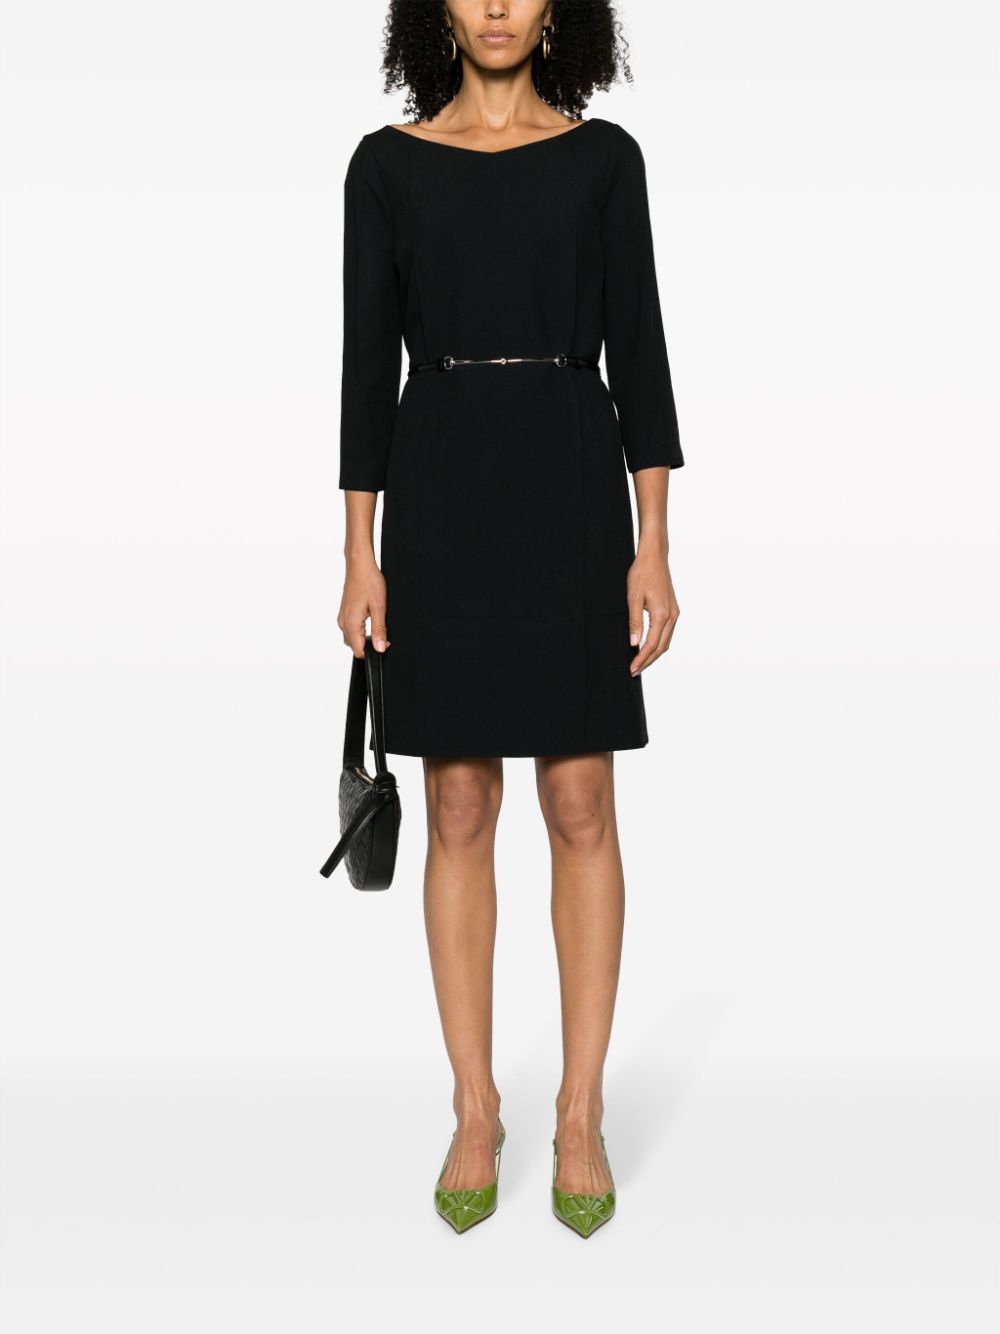 Sleek Belted Dress in Black with Signature Horsebit Detail for Women